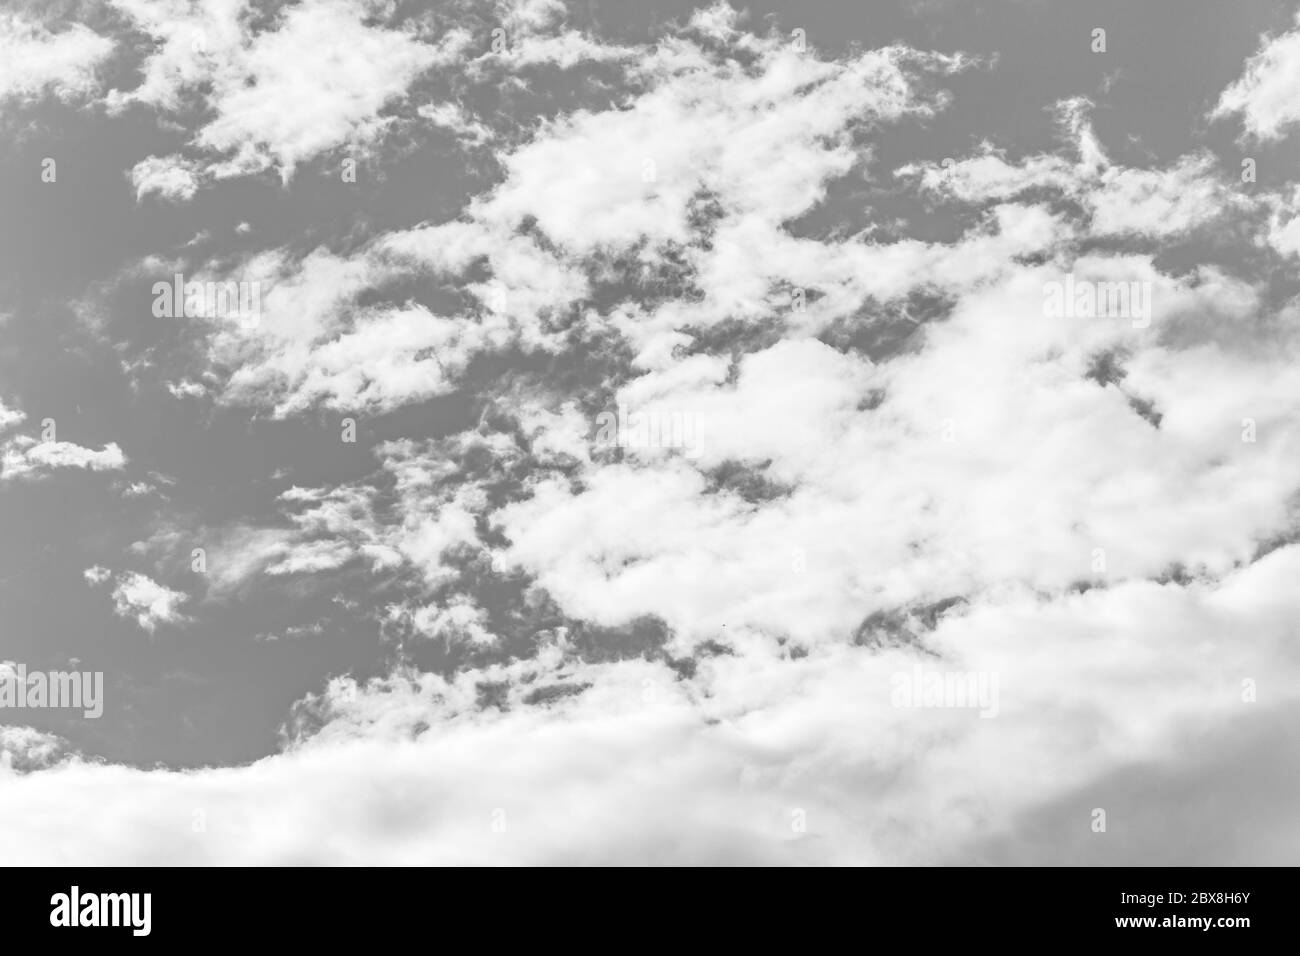 Clouds in the sky on a summer day in landscape format Stock Photo